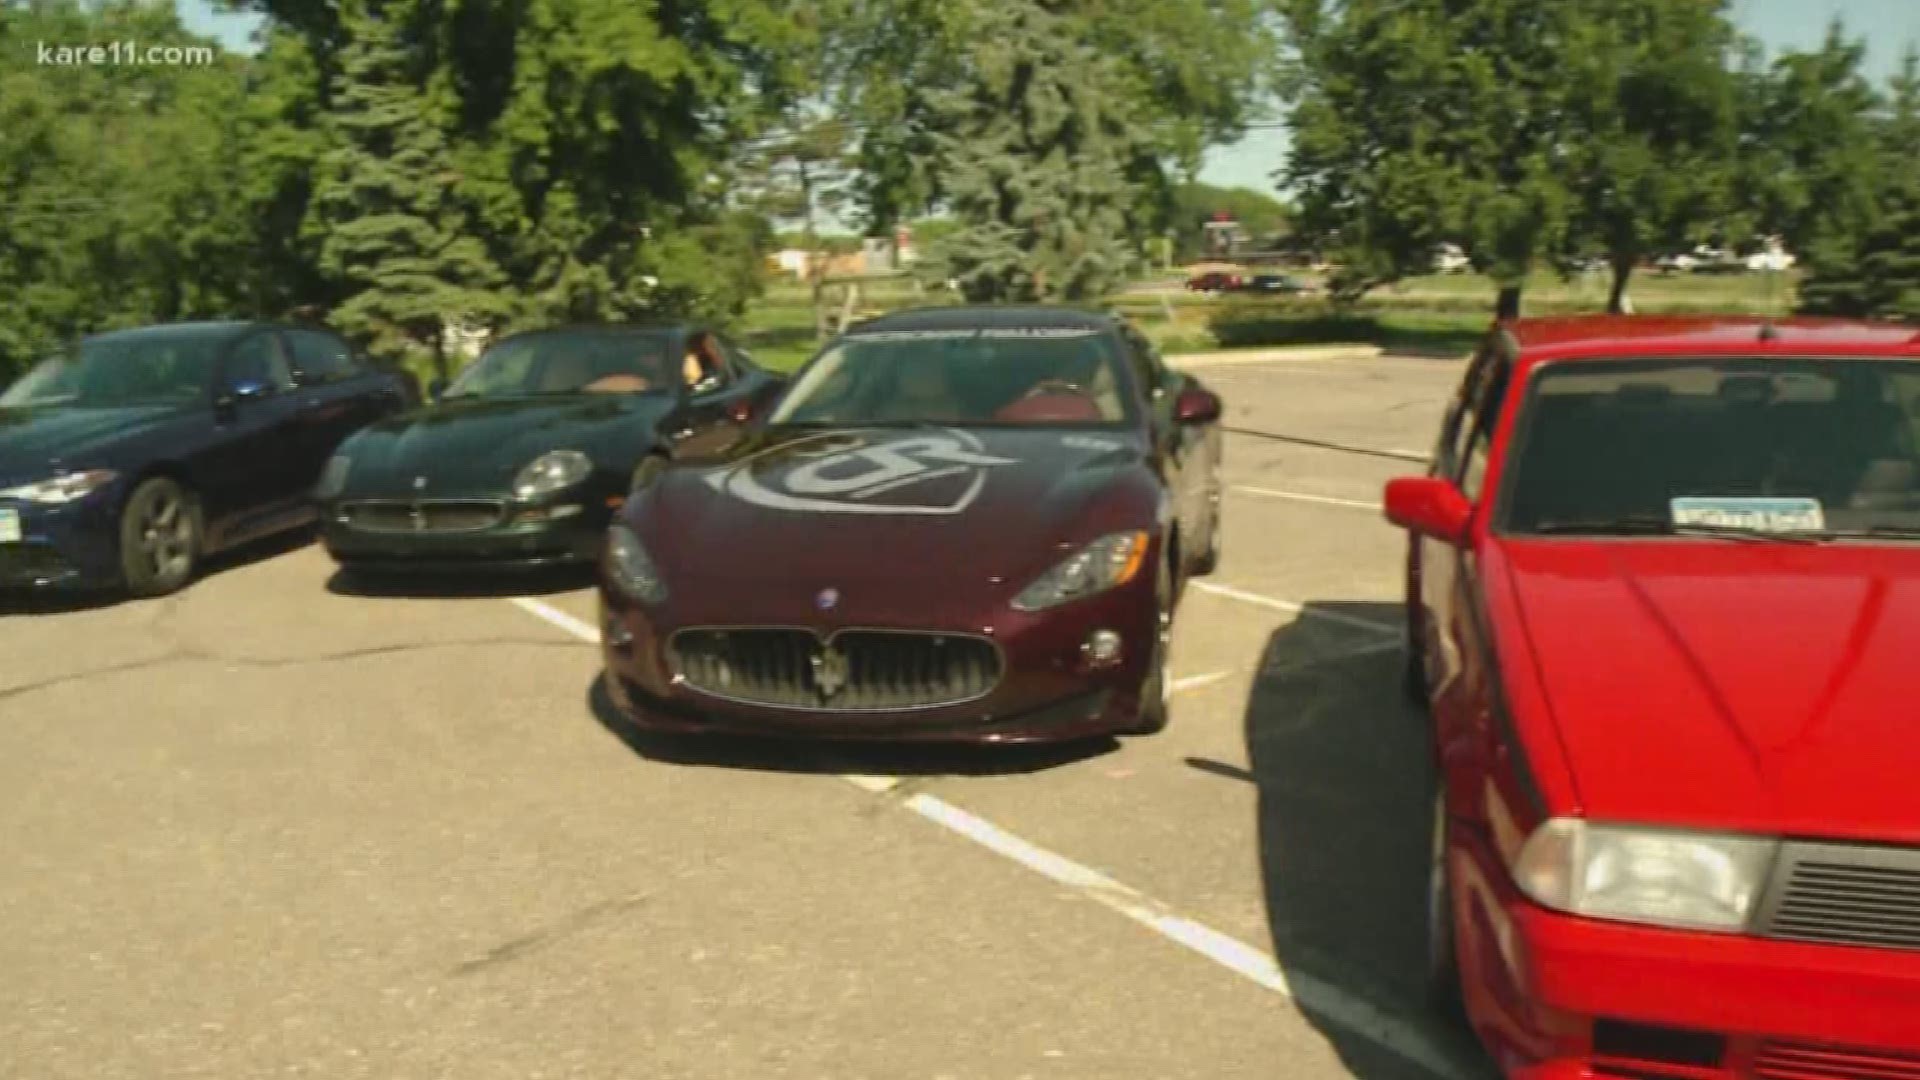 The free Wheels of Italy event on July 26th will showcase many expensive cars made by Maserati, Alfa Romeo, Fiat, and more. First, they stopped by KARE to display some of the vehicles.